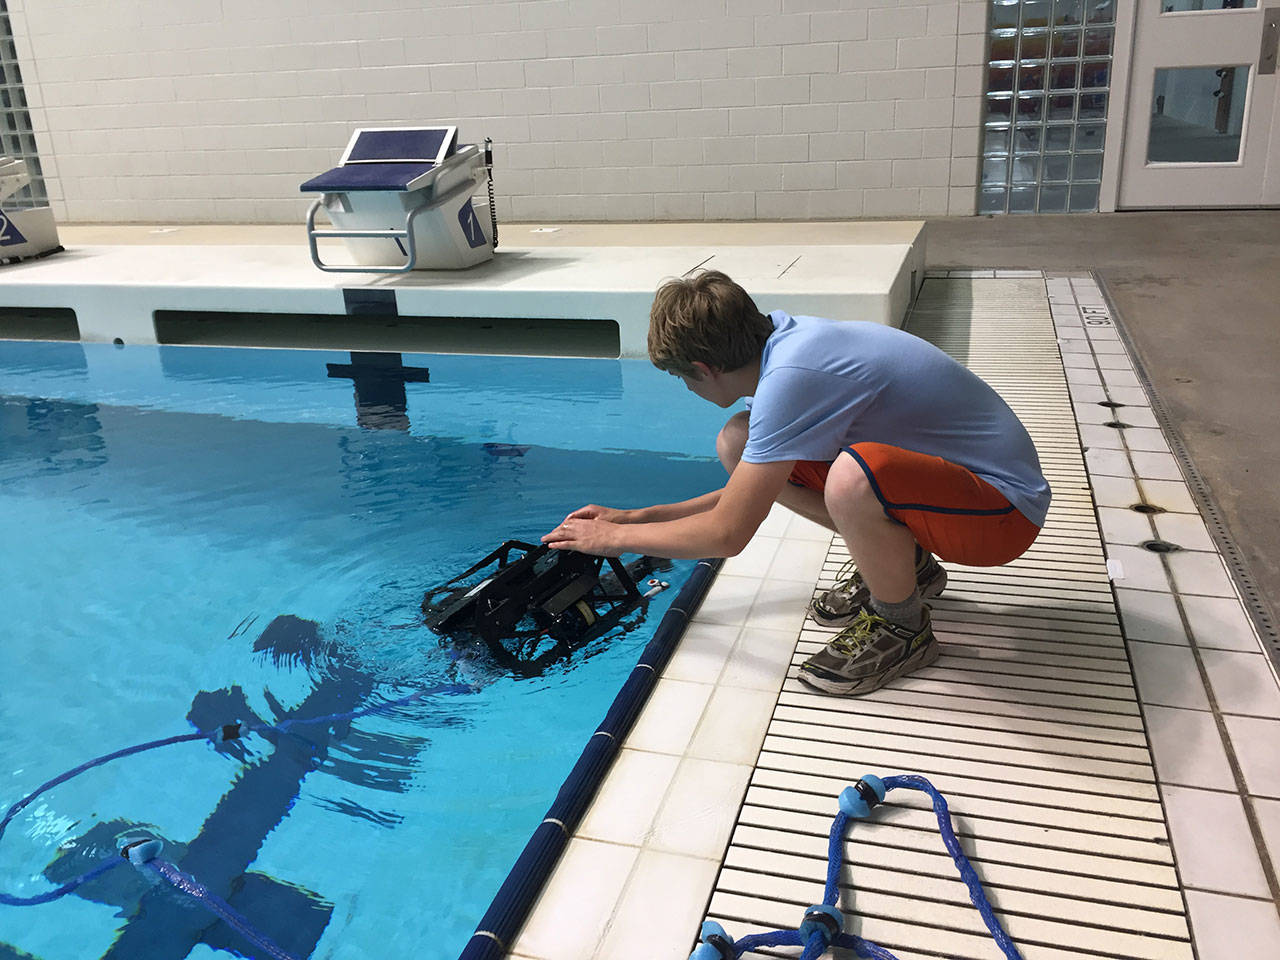 The Sea Dragons tether manager Everest Ashford retrieves the S.S. Dragon from the pool during practice. (Ella Ashford)